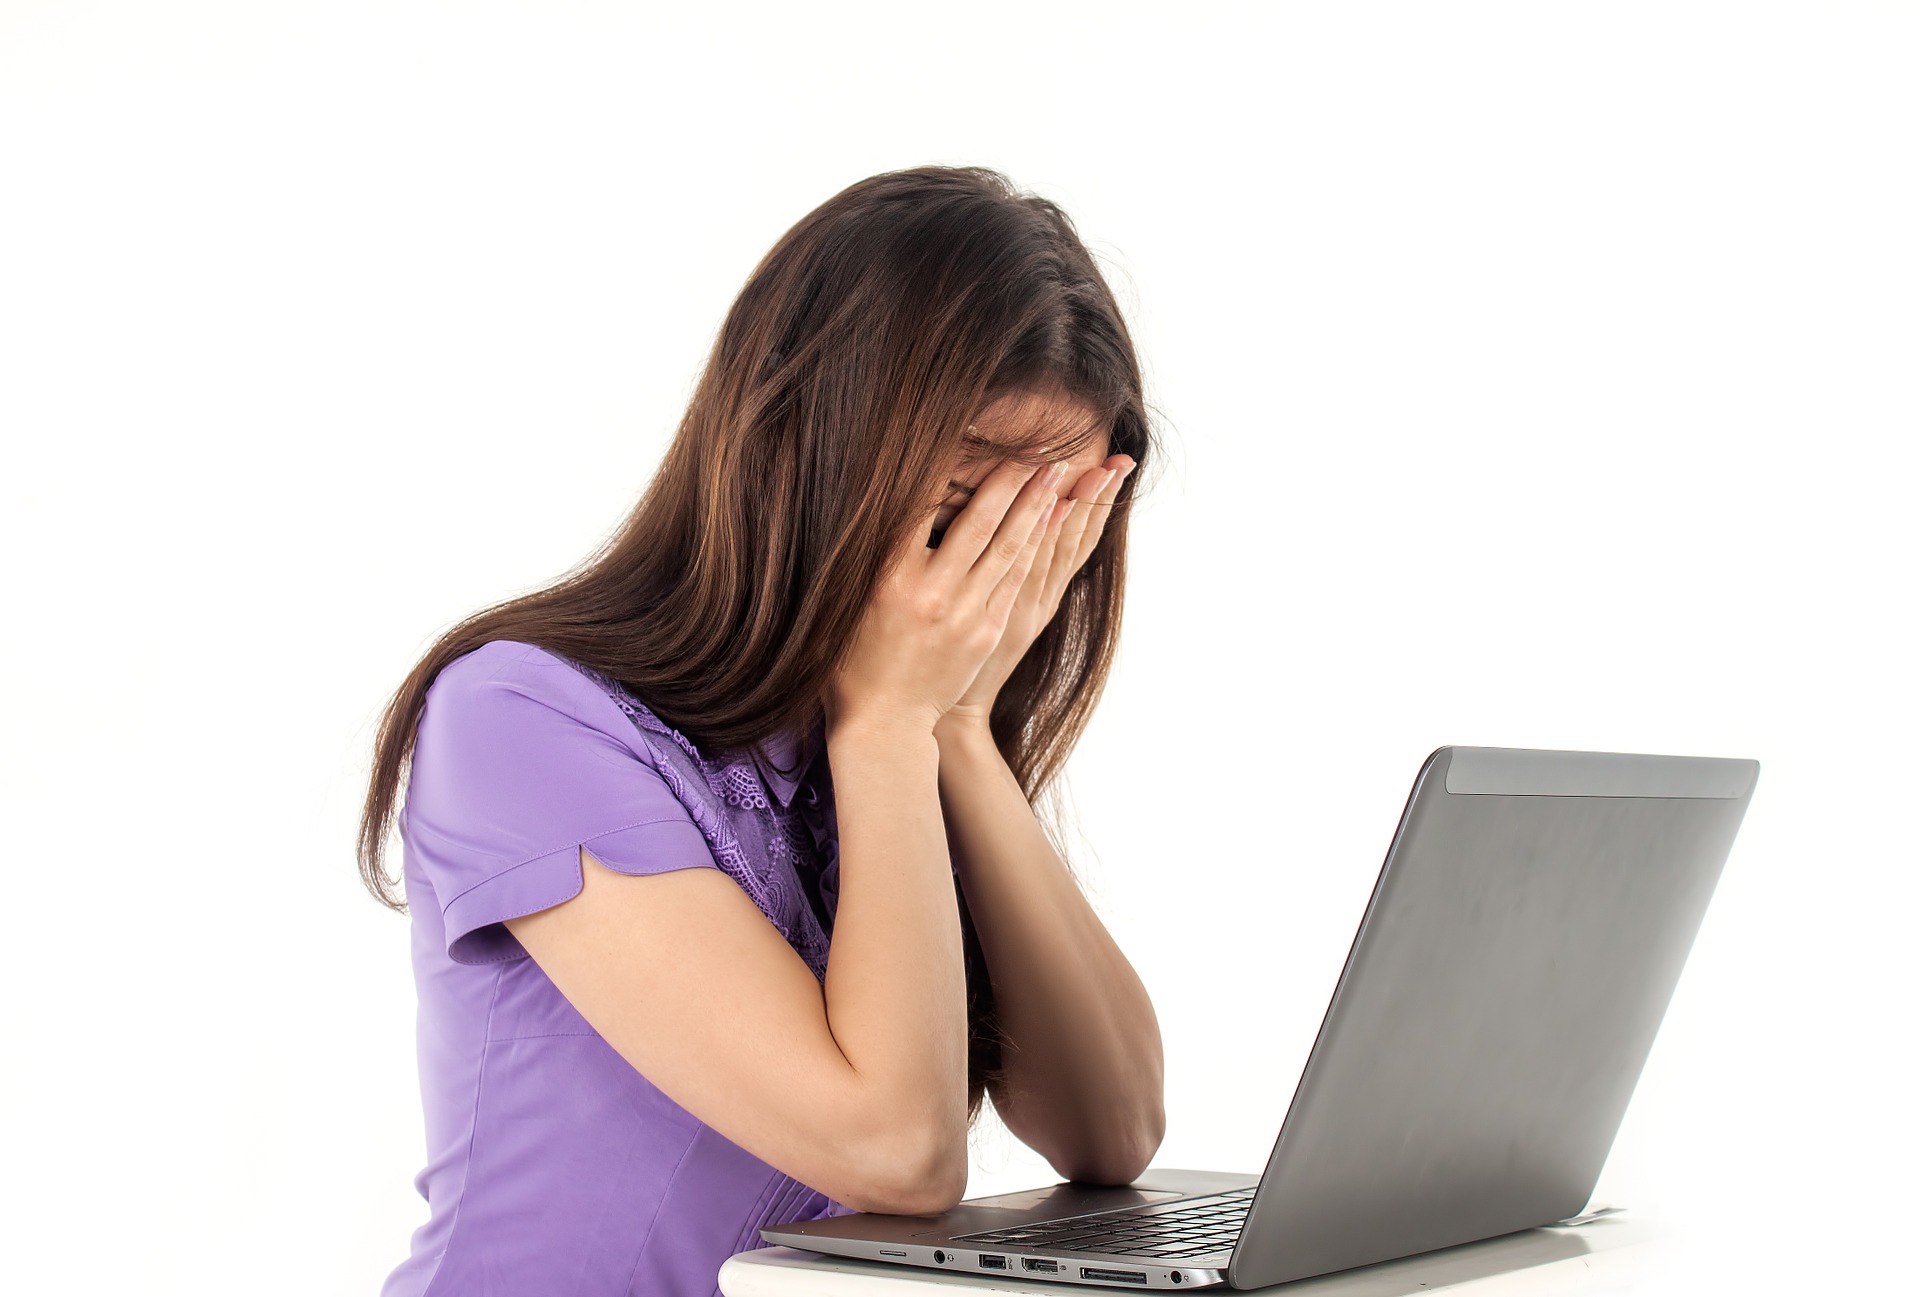 Girl with hands on her face with a laptop